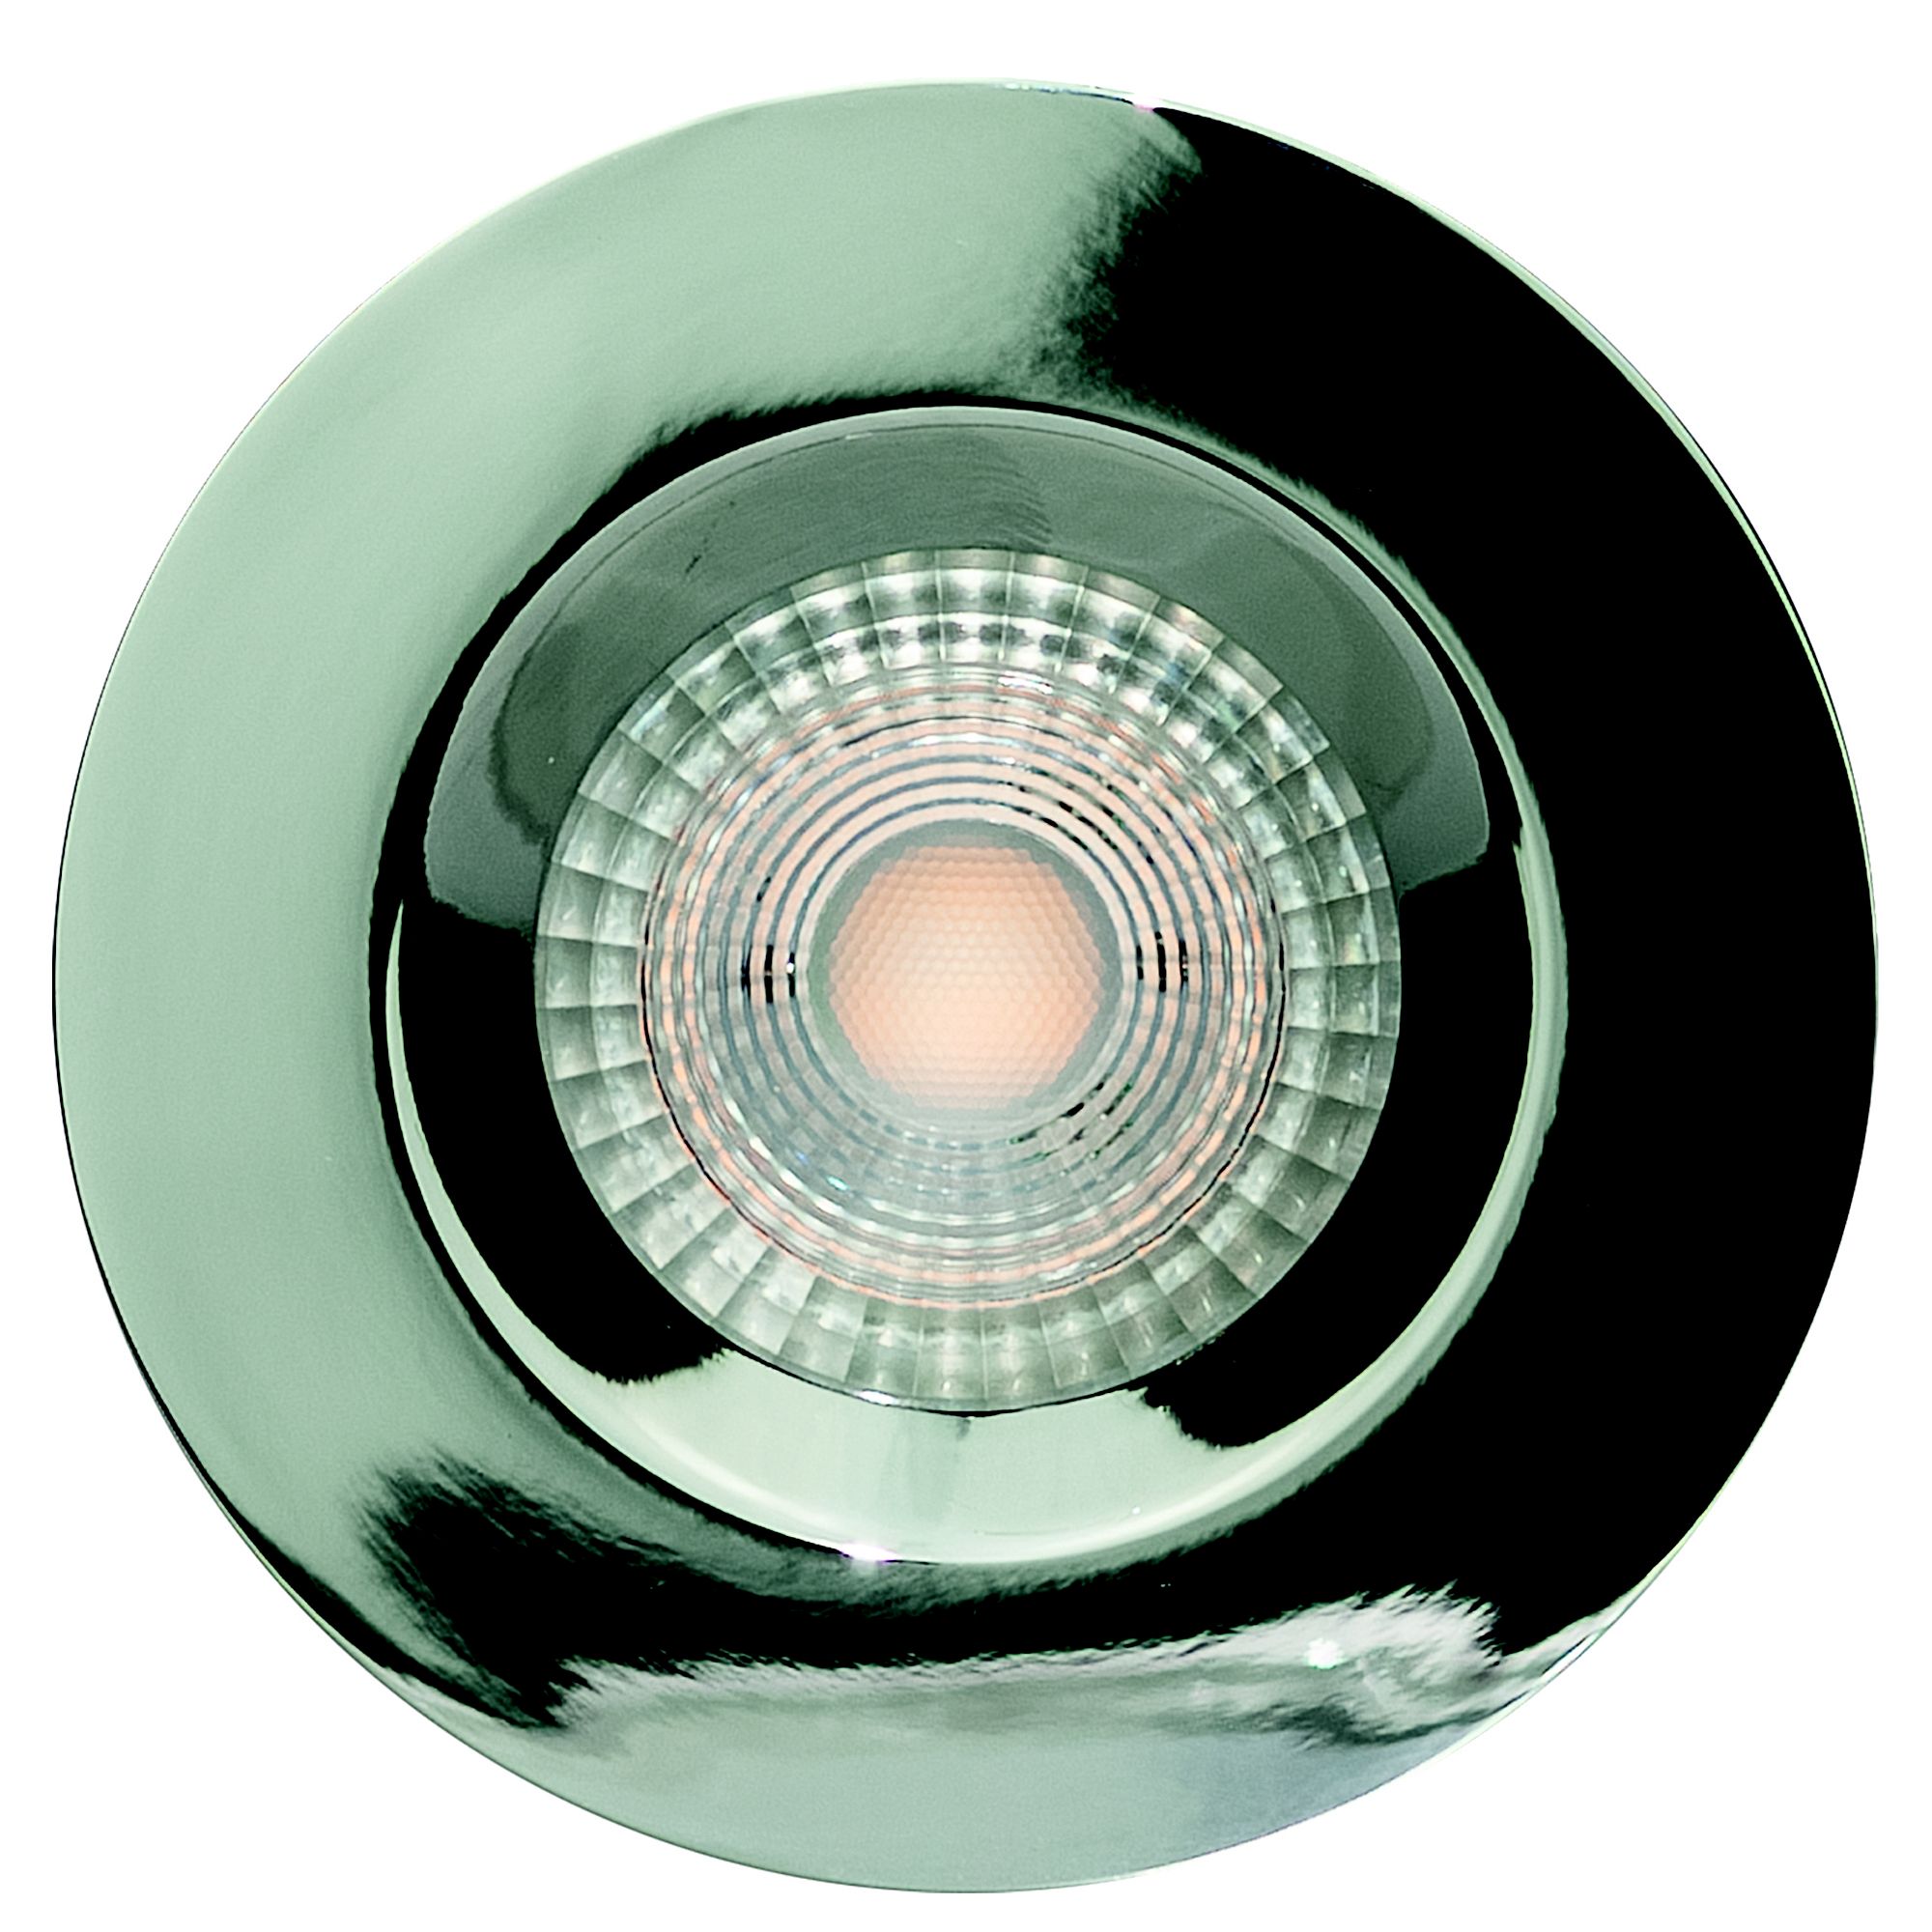 Luceco Chrome effect Fixed Fire-rated White Downlight IP20